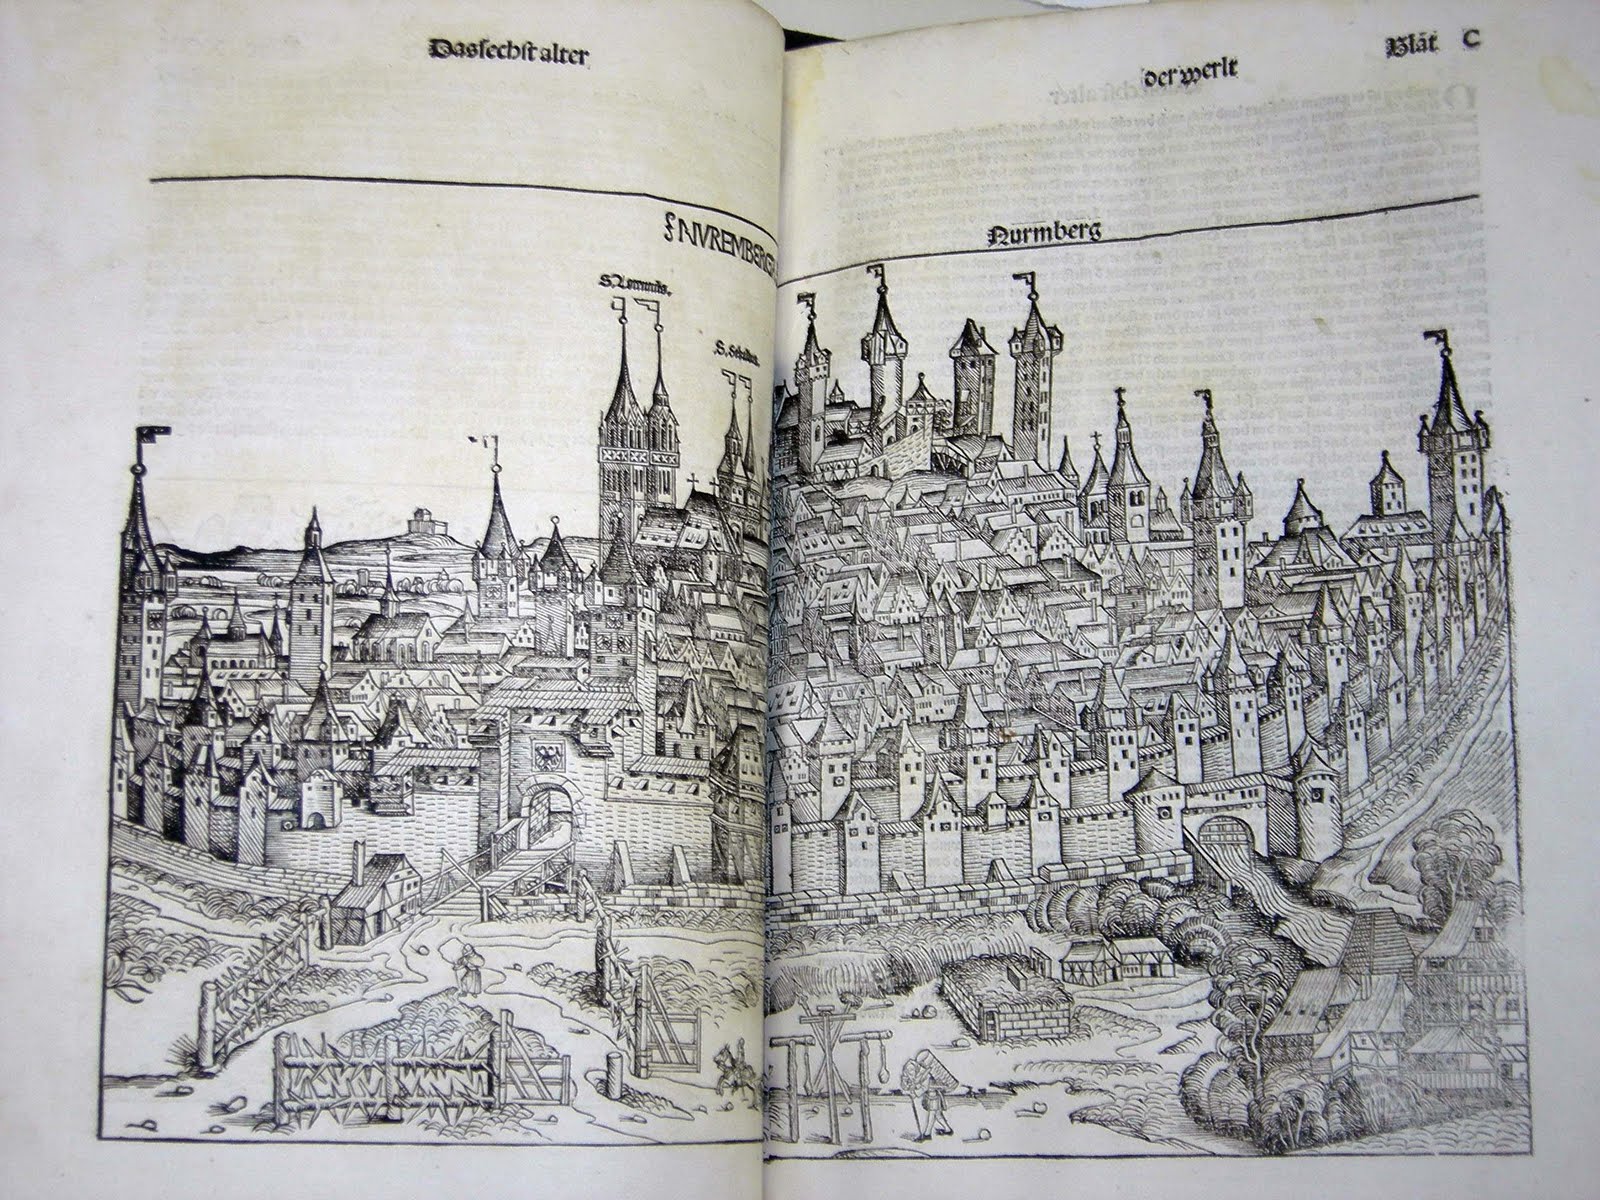 The german edition of The Nuremberg Chronicles opened to two pages displaying a woodcut illustration of the walled city of Nuremberg